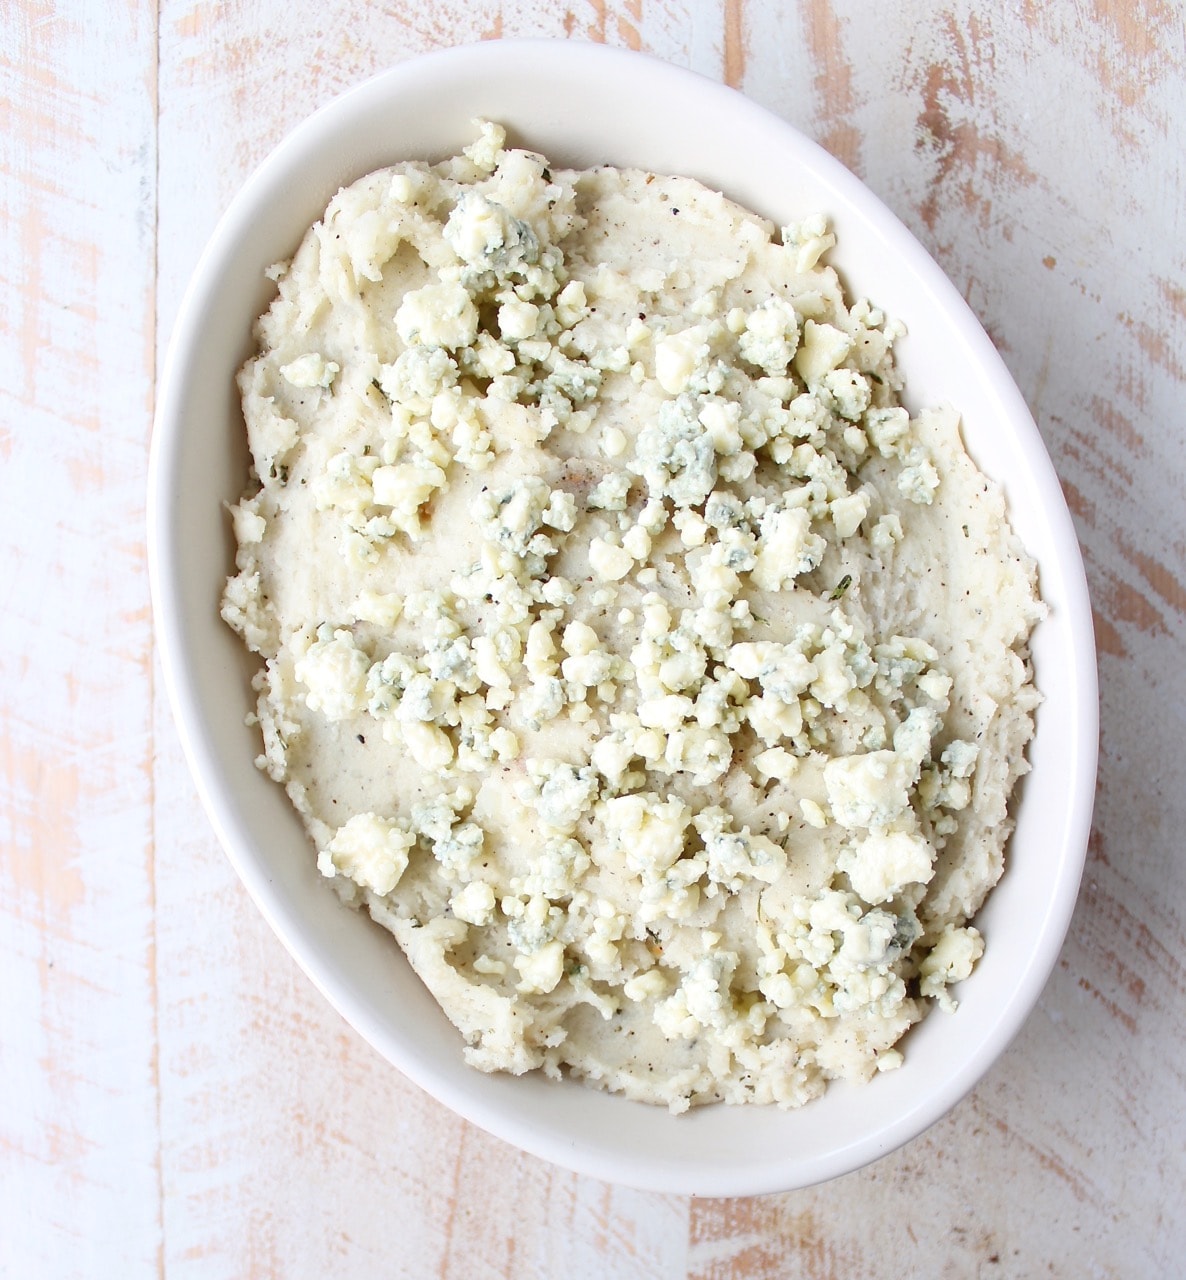 mashed potatoes in a bowl, topped with blue cheese crumbles